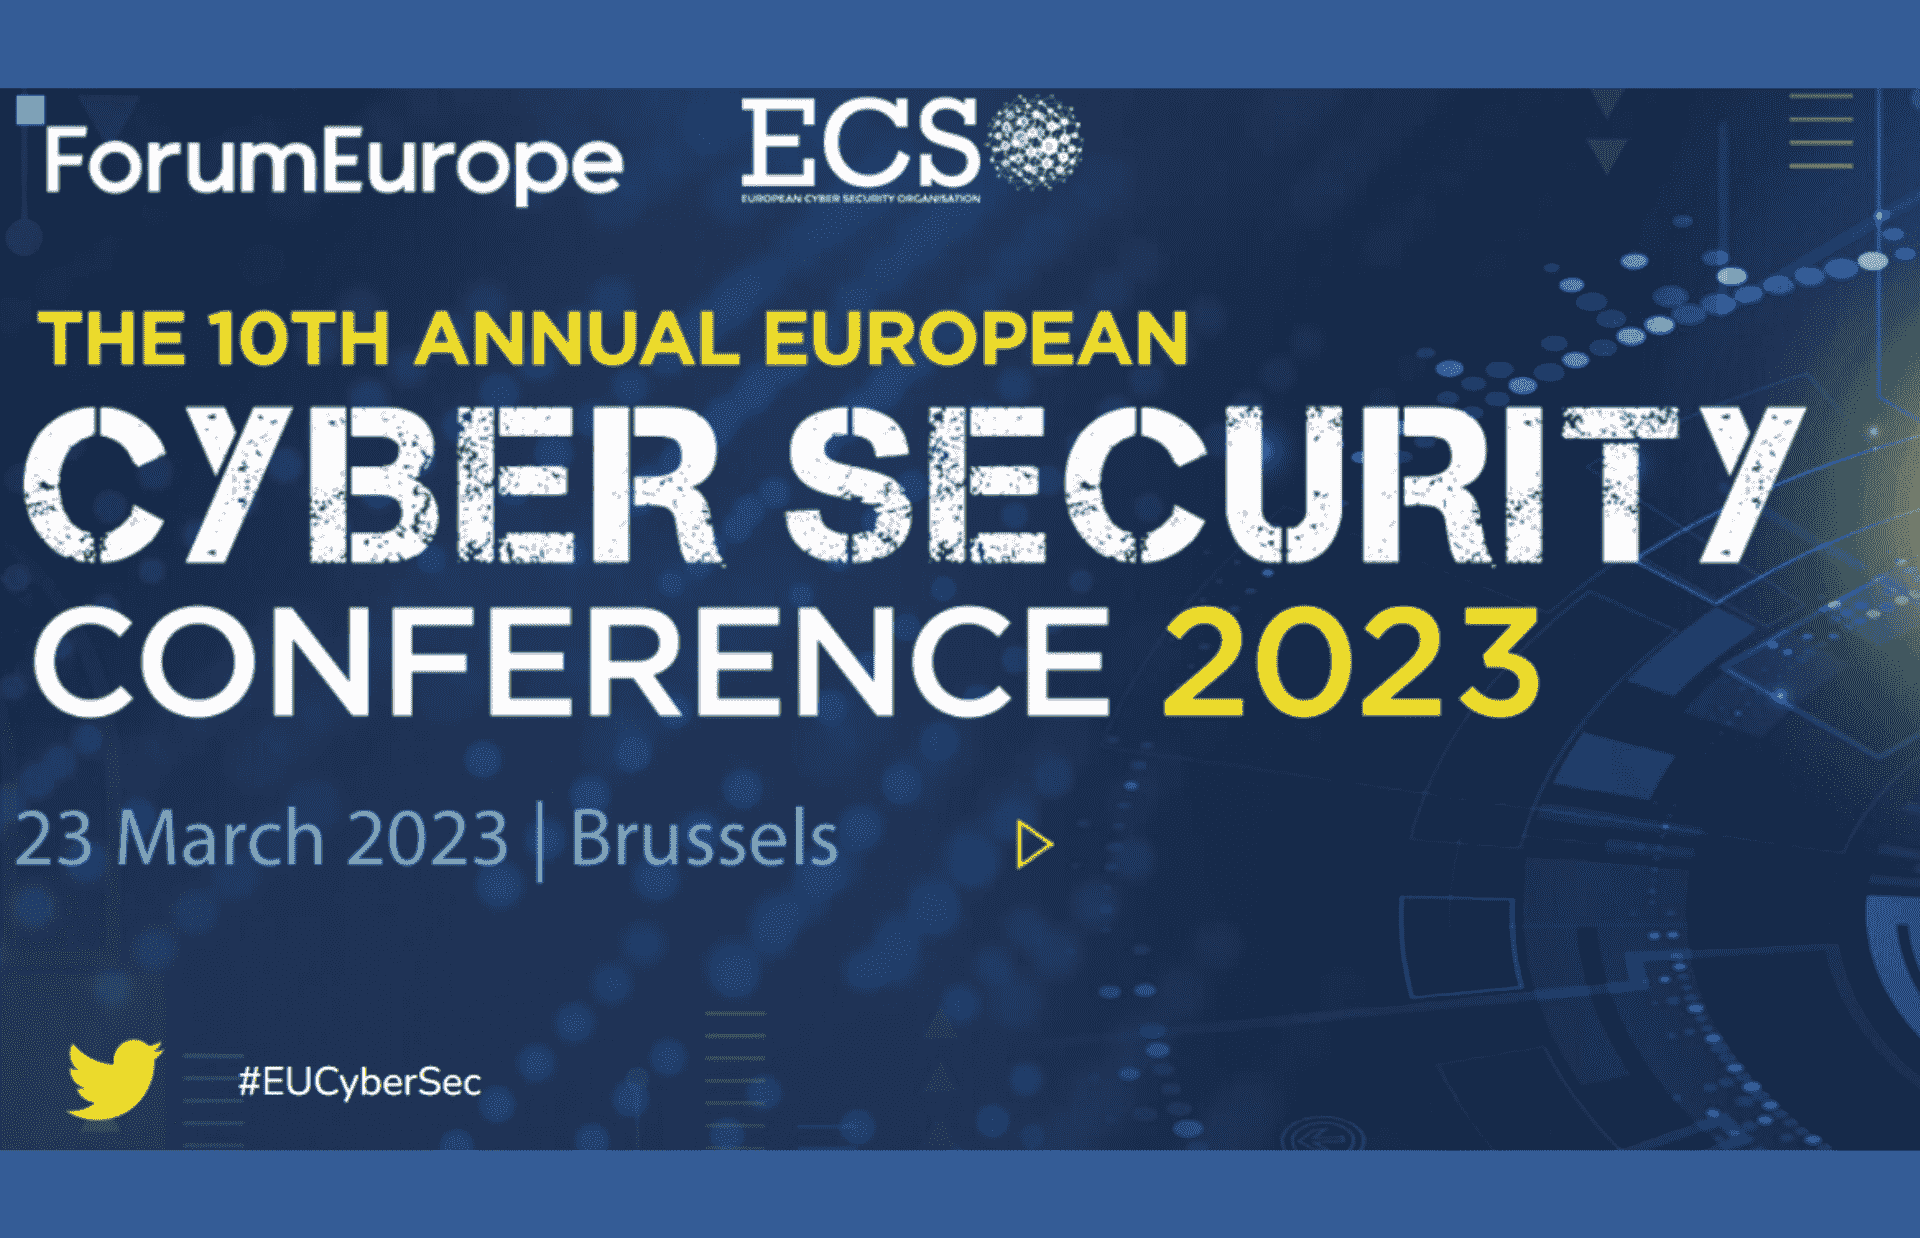 The 10th European Cyber Security Conference